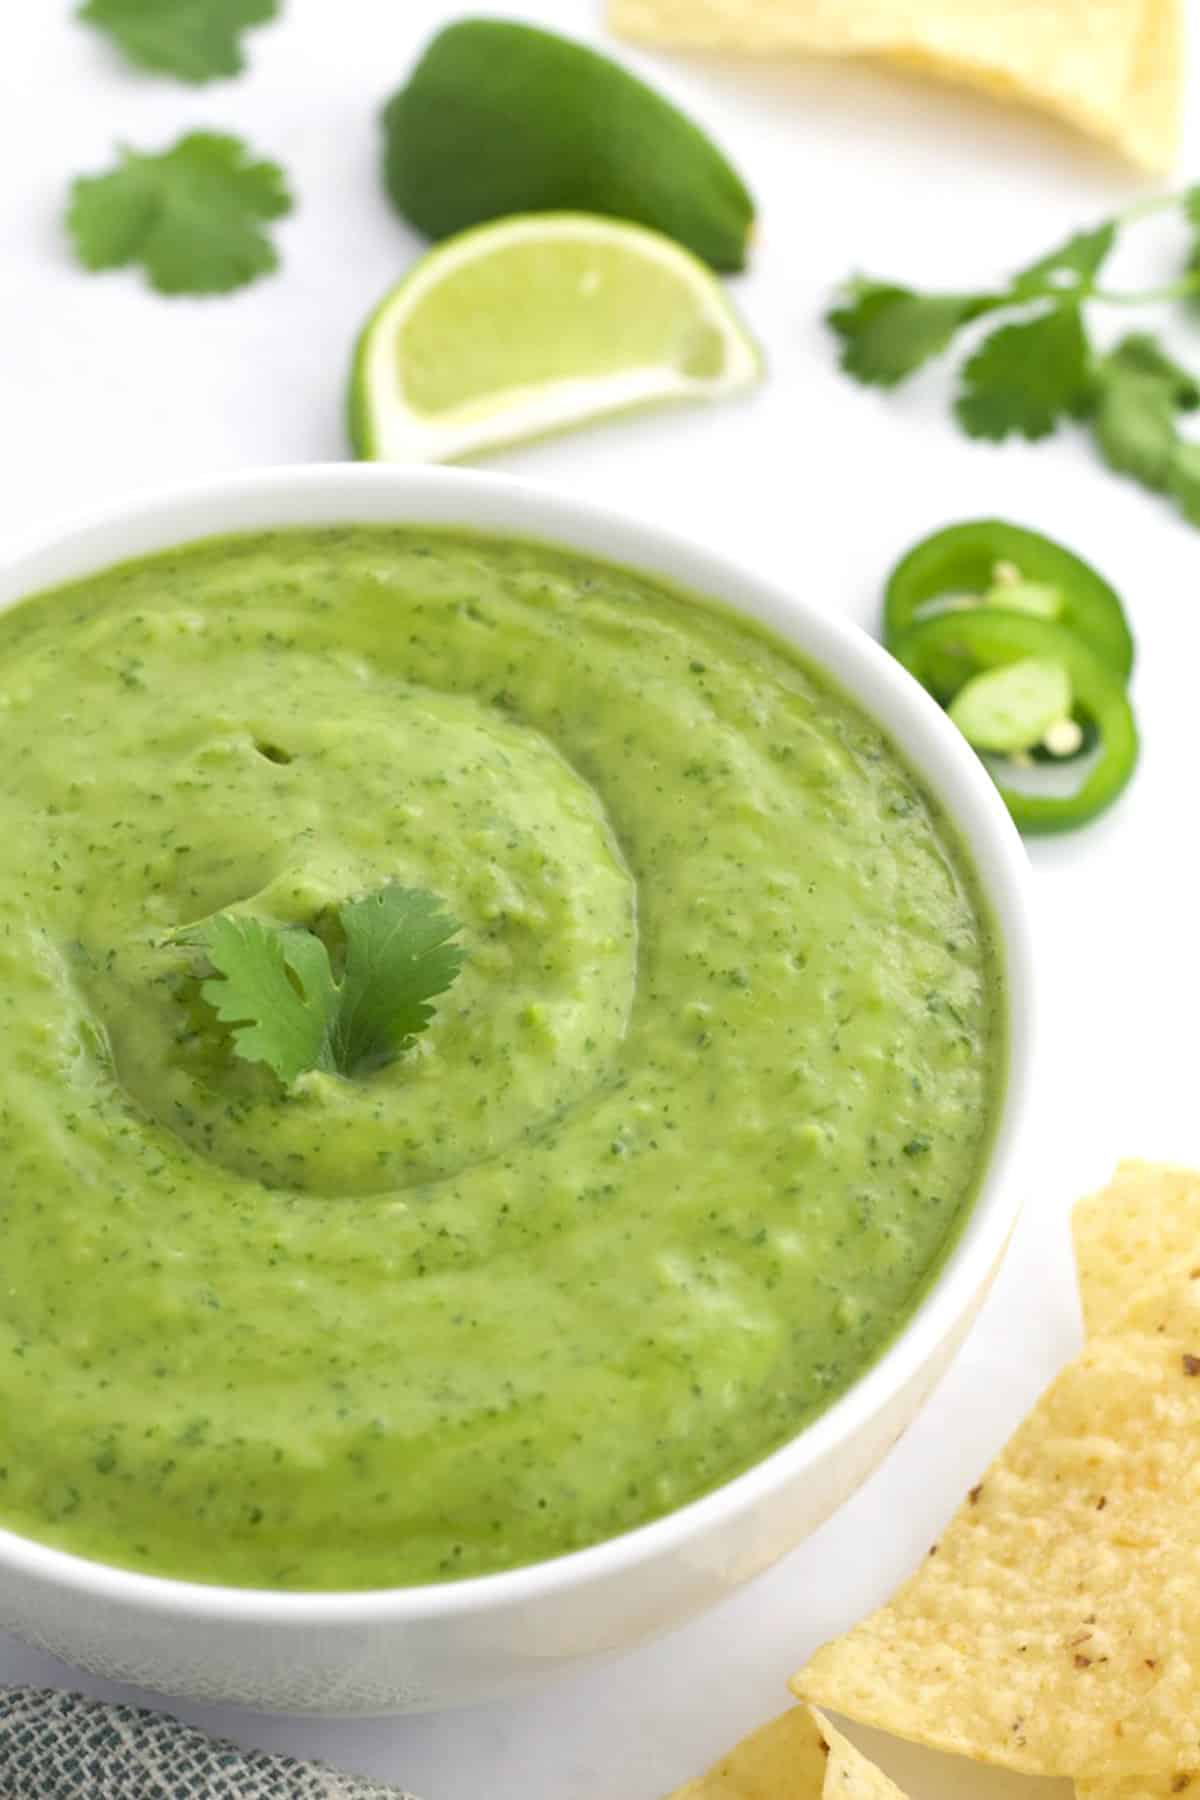 White bowl of green salsa with cilantro, chips, limes, and jalpeno slices in the background.